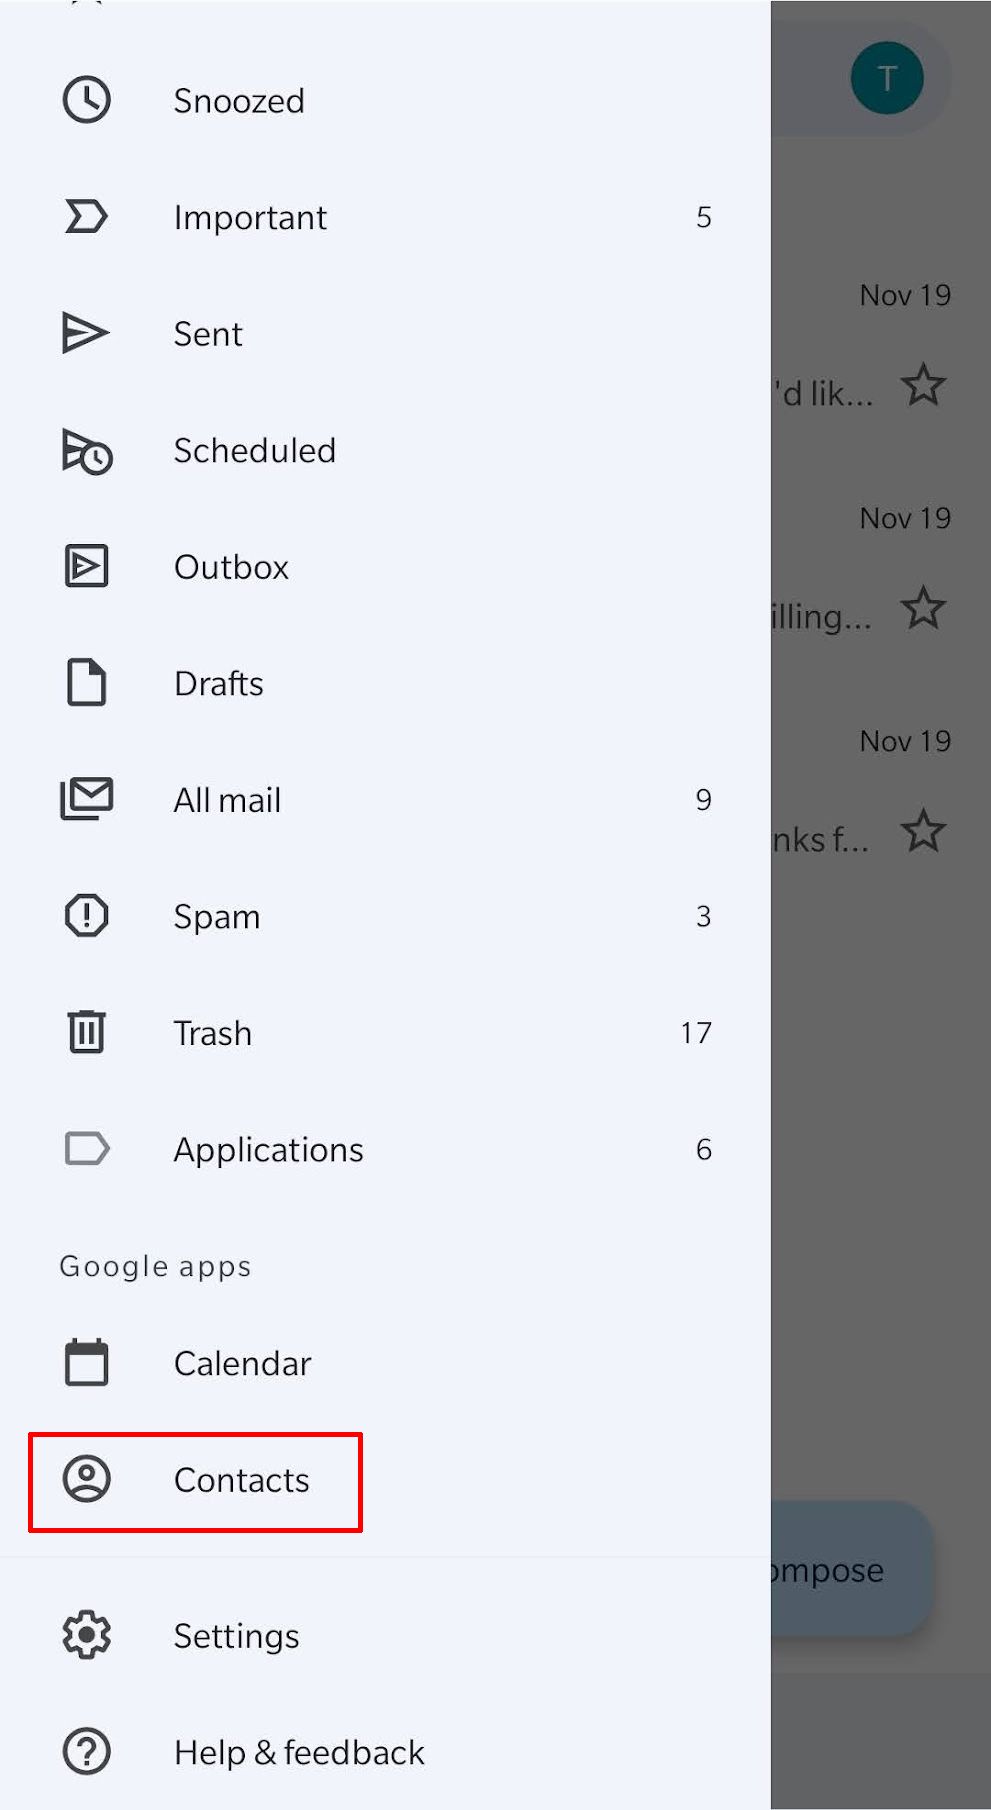 Gmail menu with Contacts option at the bottom.